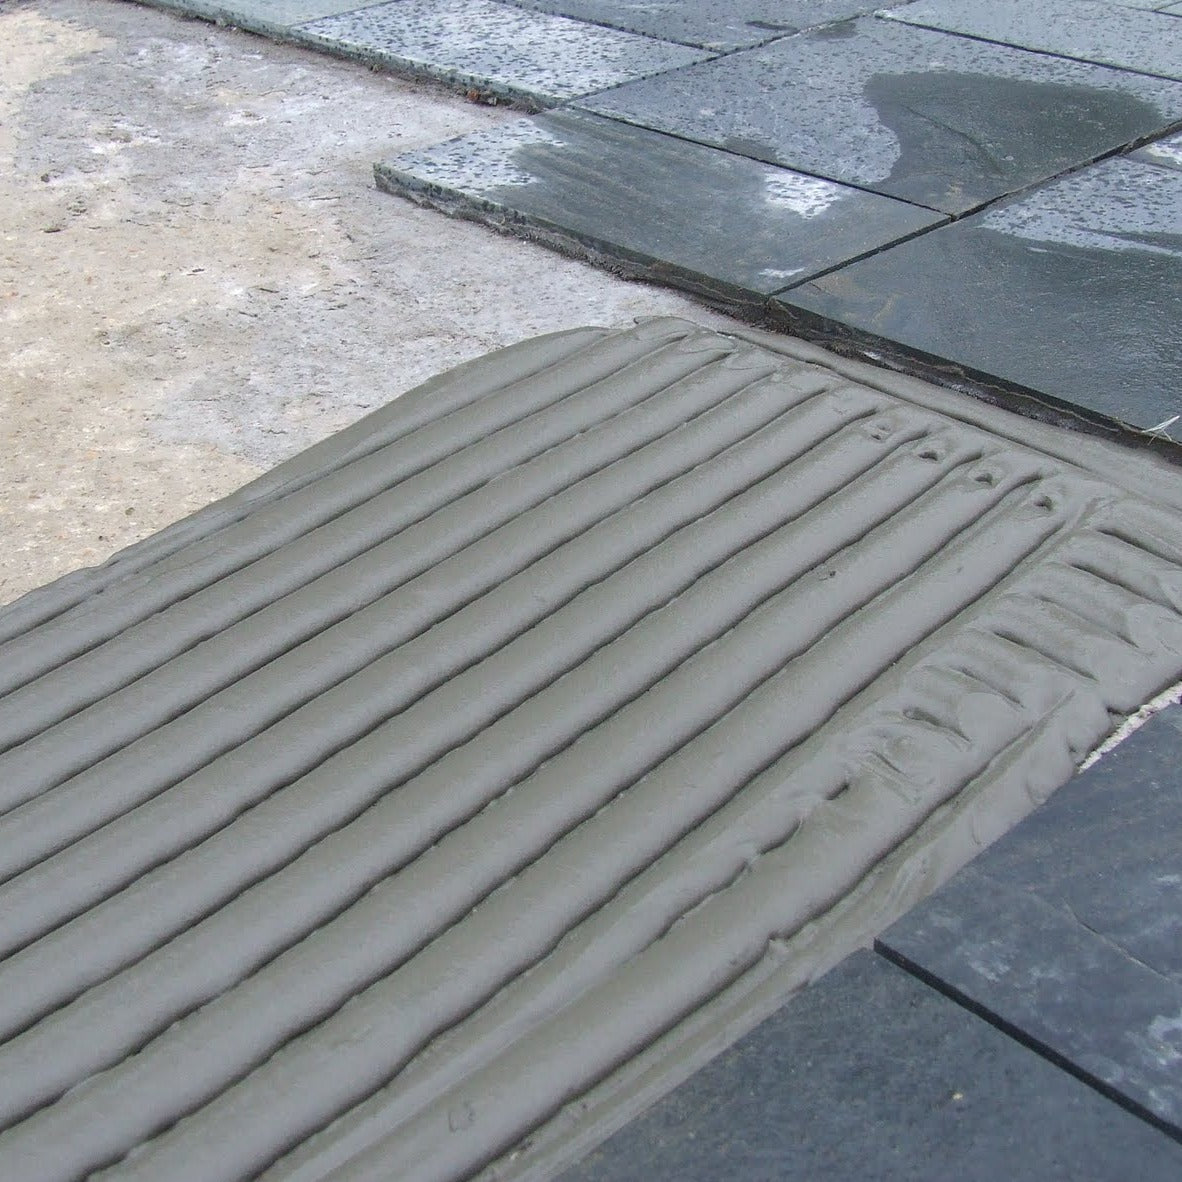 Black Slate Paving Tiles | 600 x 400 x 10 mm| Collection Colchester, £17.55/m2